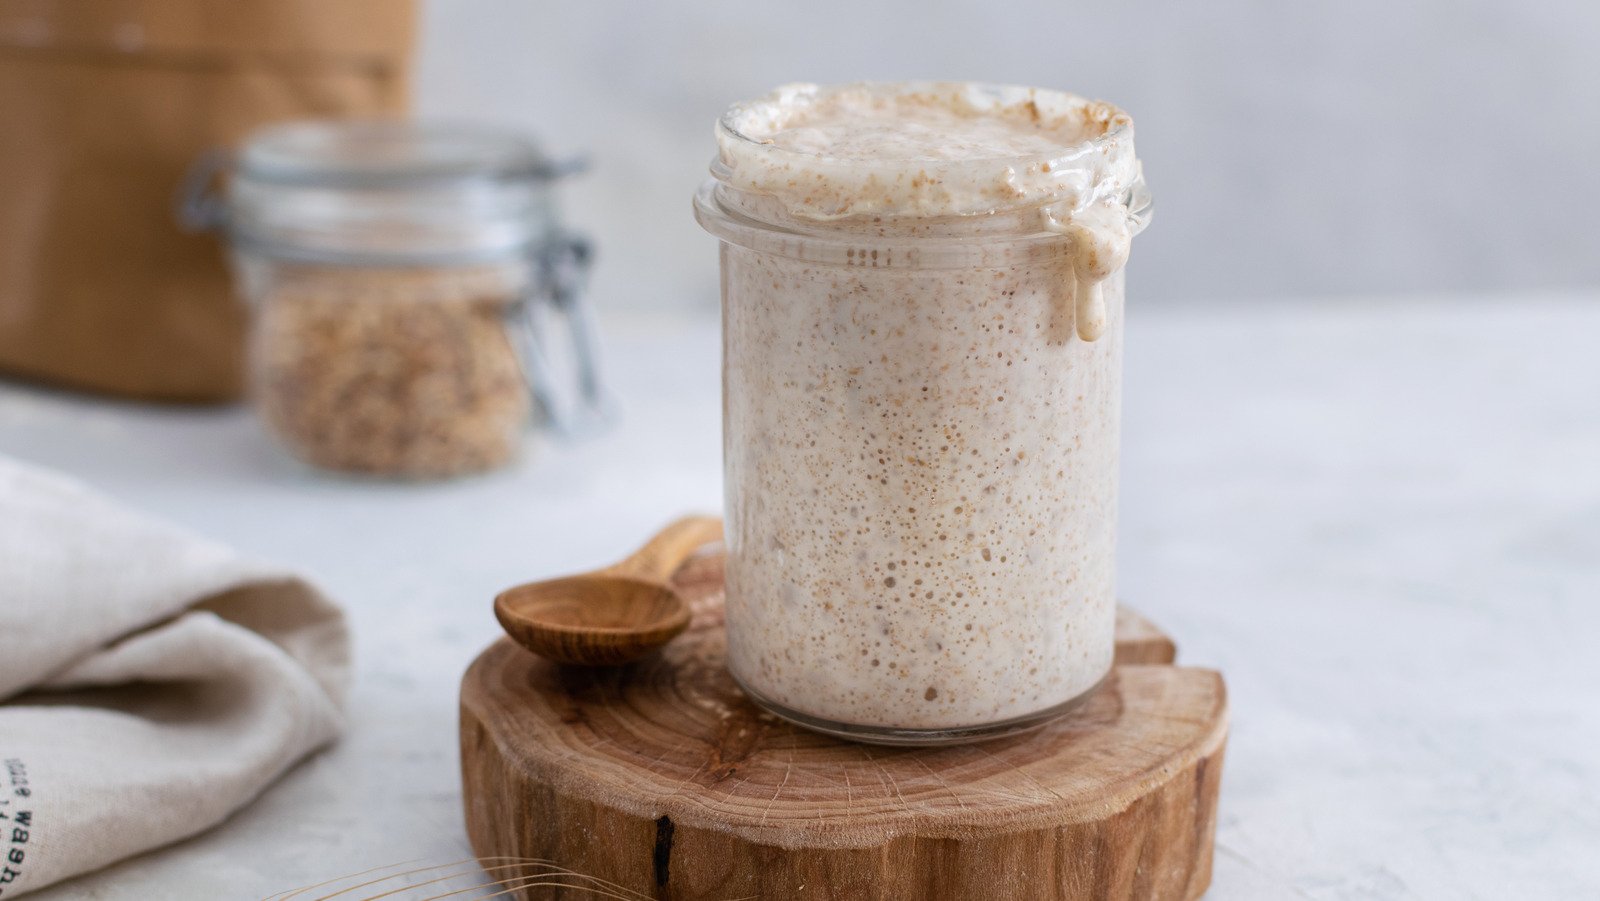 The Trick To Reviving That Sourdough Starter That's Been In Your Fridge For Months